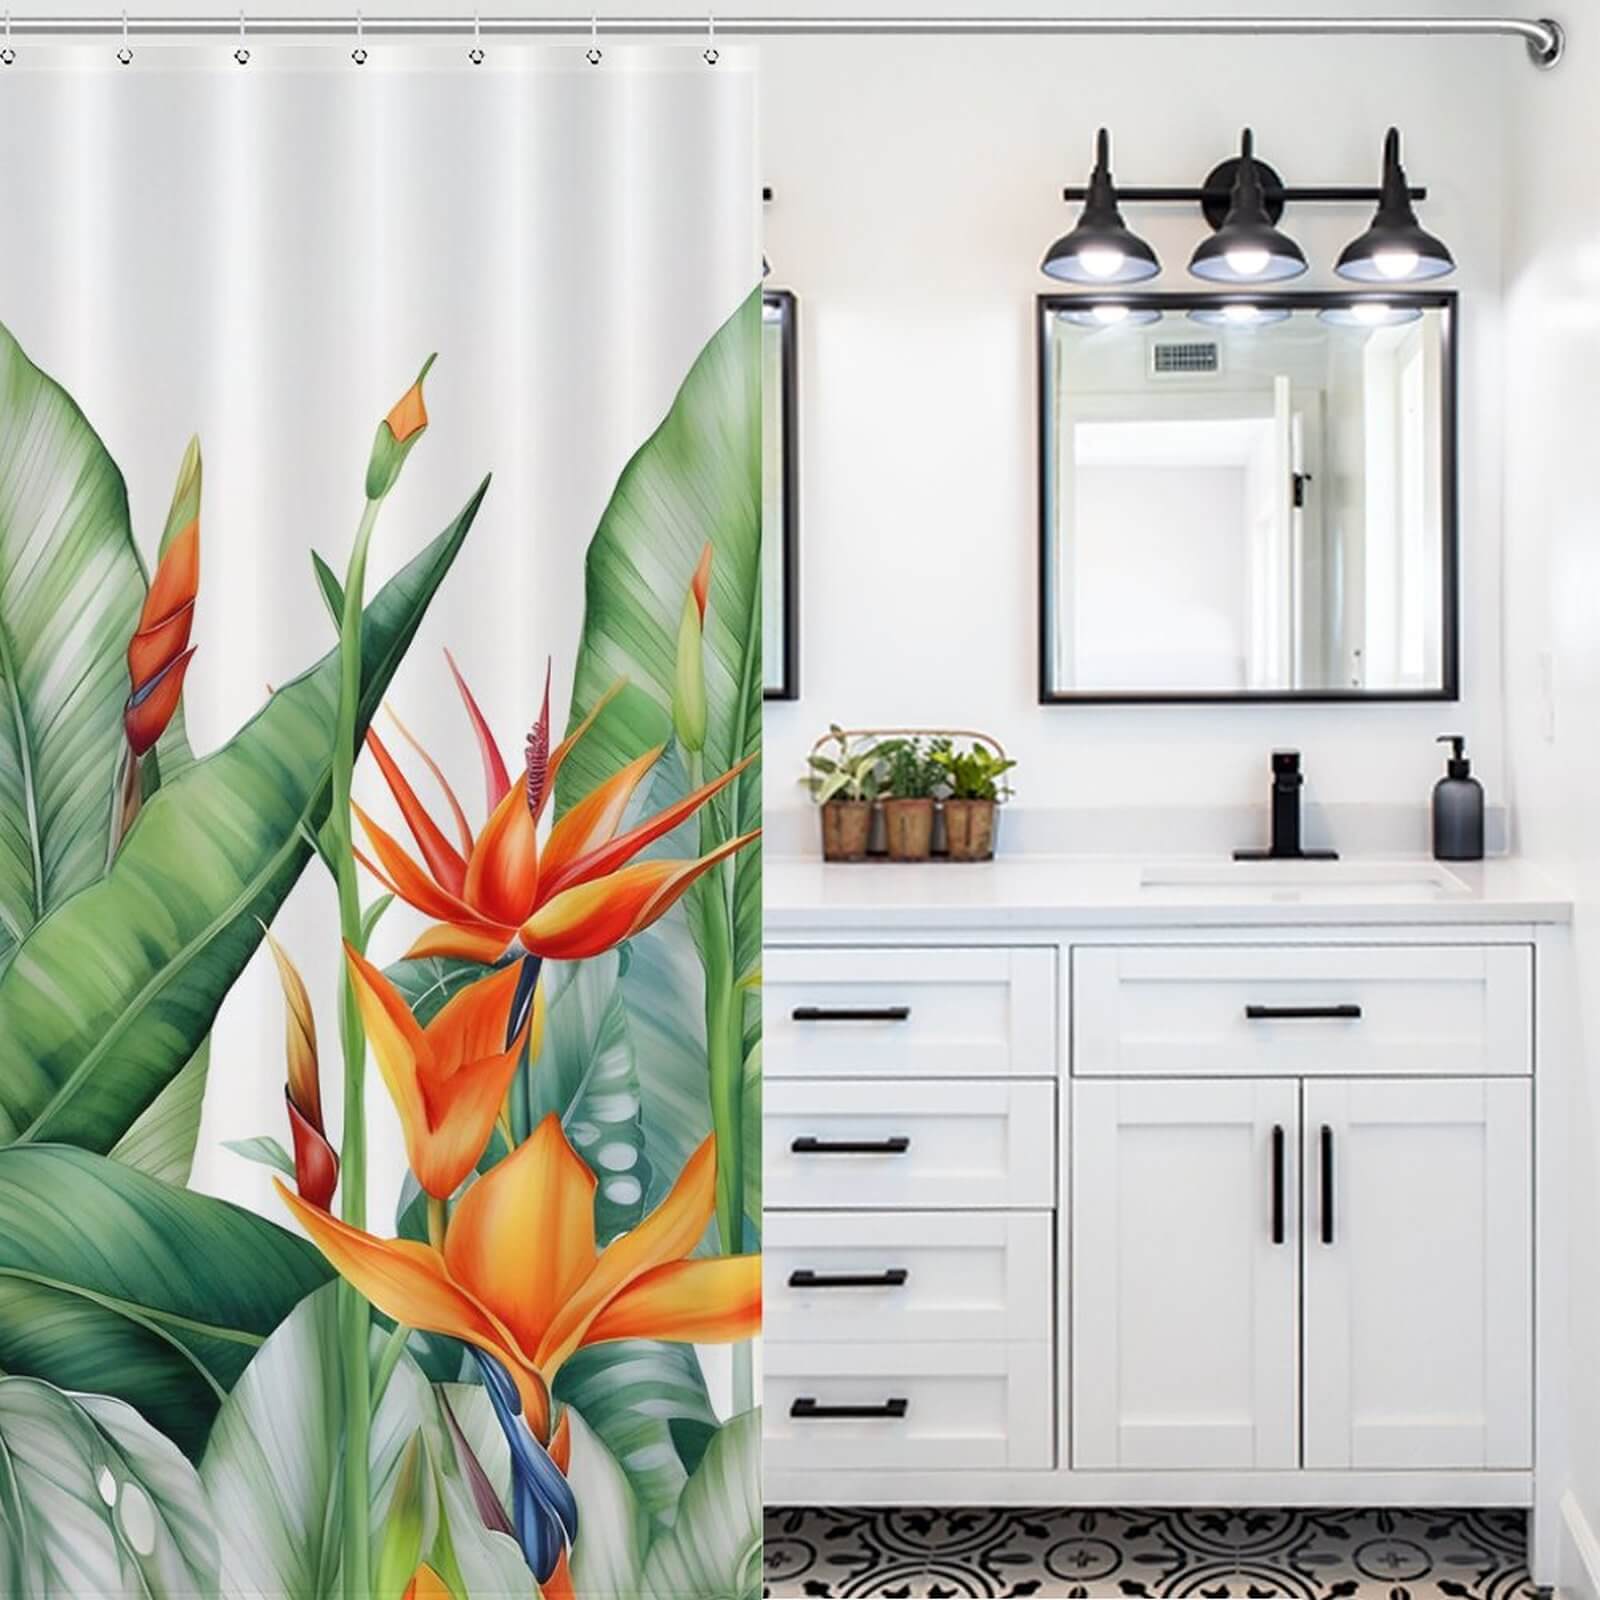 Waterproof Botanical Jungle shower curtain with a jungle theme featuring bird of paradise motifs, by Cotton Cat.